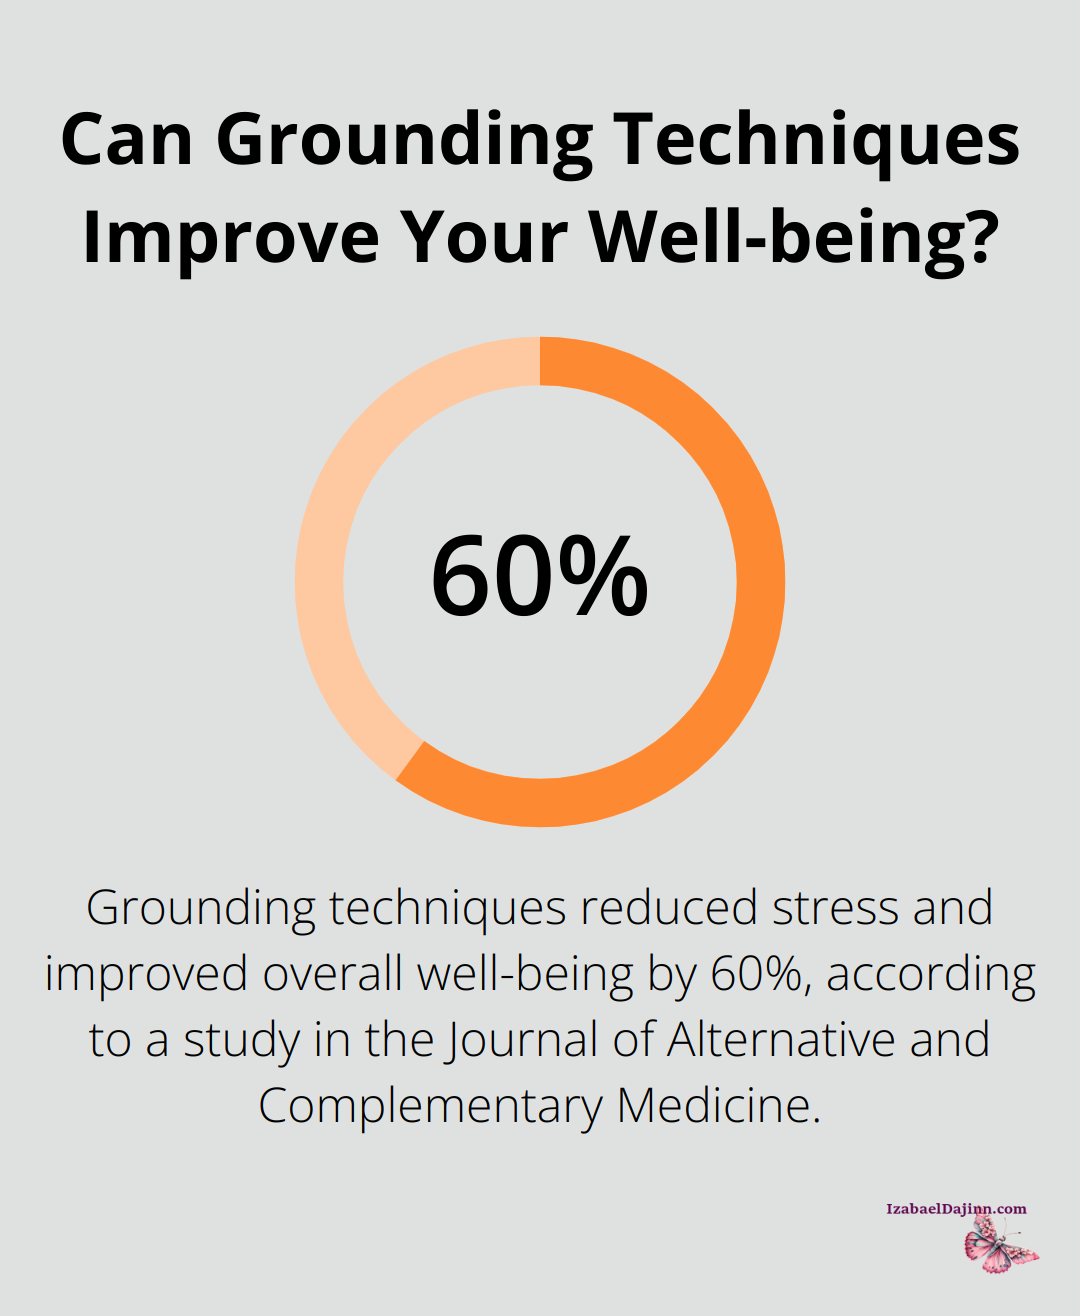 Can Grounding Techniques Improve Your Well-being?